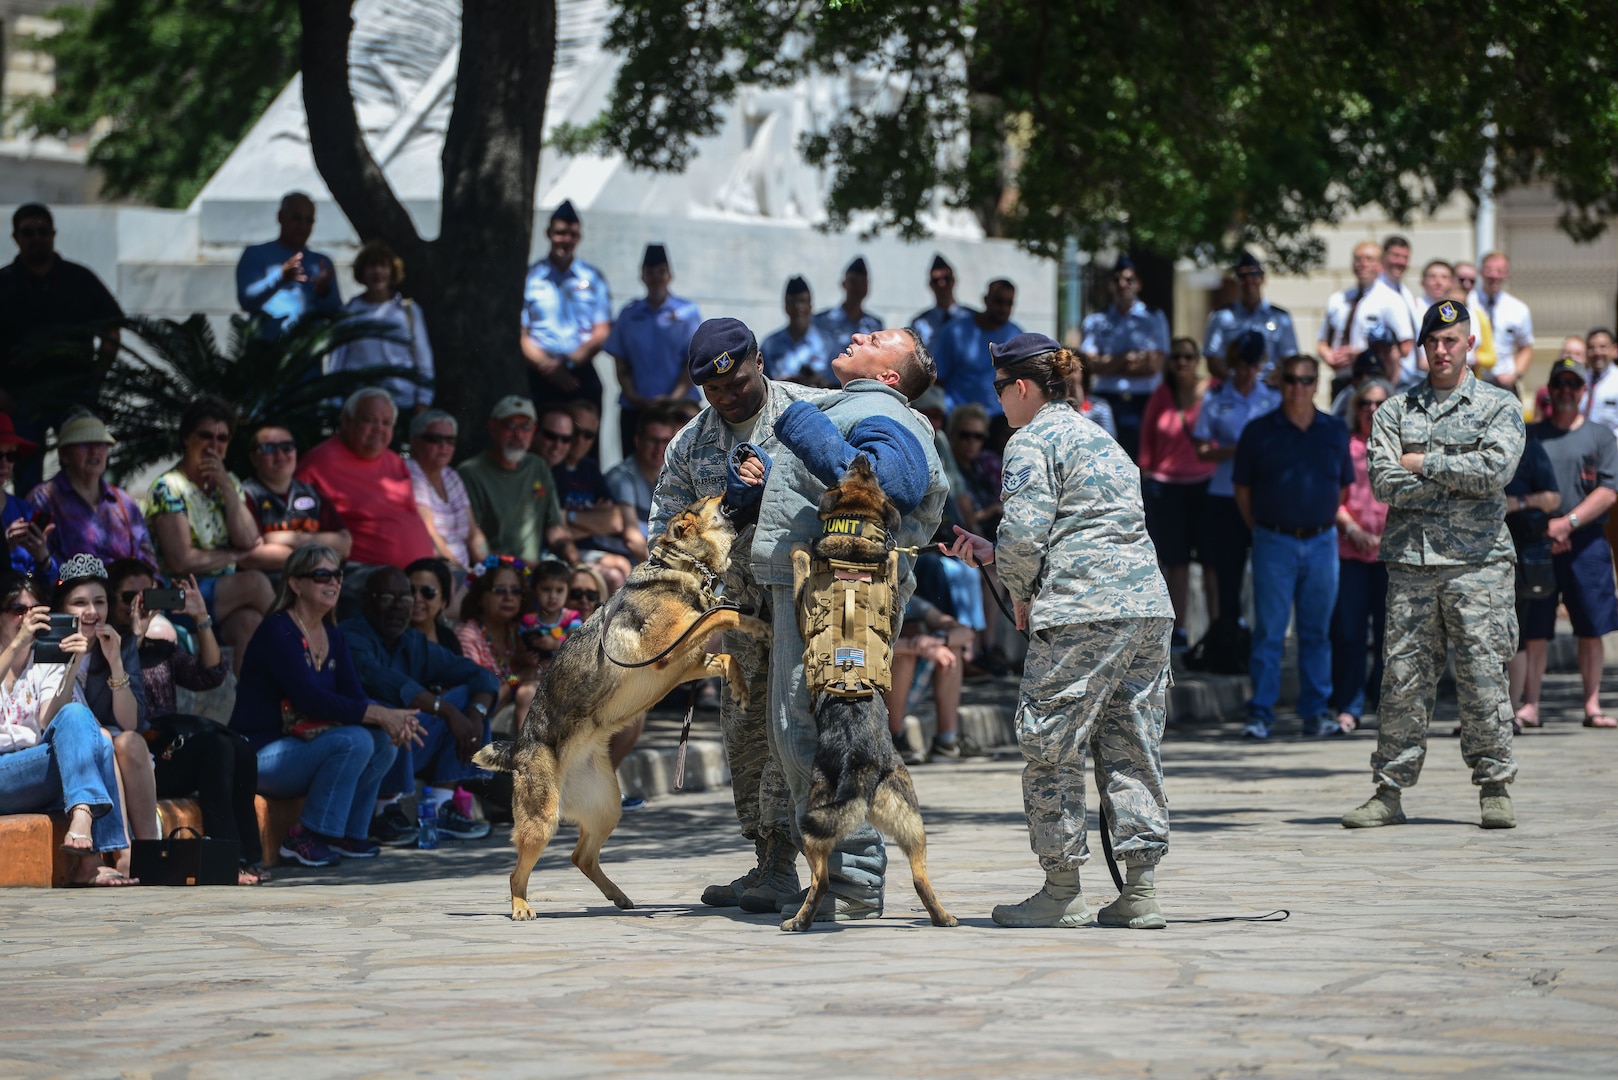 502nd Civil Engineer Squadron Explosive Ordnance Disposal technicians from Joint Base San Antonio-Lackland demonstrated their equipment and methods of bomb disposal during San Antonio’s Fiesta 2017 Air Force Day at the Alamo April 24. Fiesta originated in 1891 as a tribute to the heroes of the Alamo and the Battle of San Jacinto. (U.S. Air Force photo by Andrew C. Patterson)